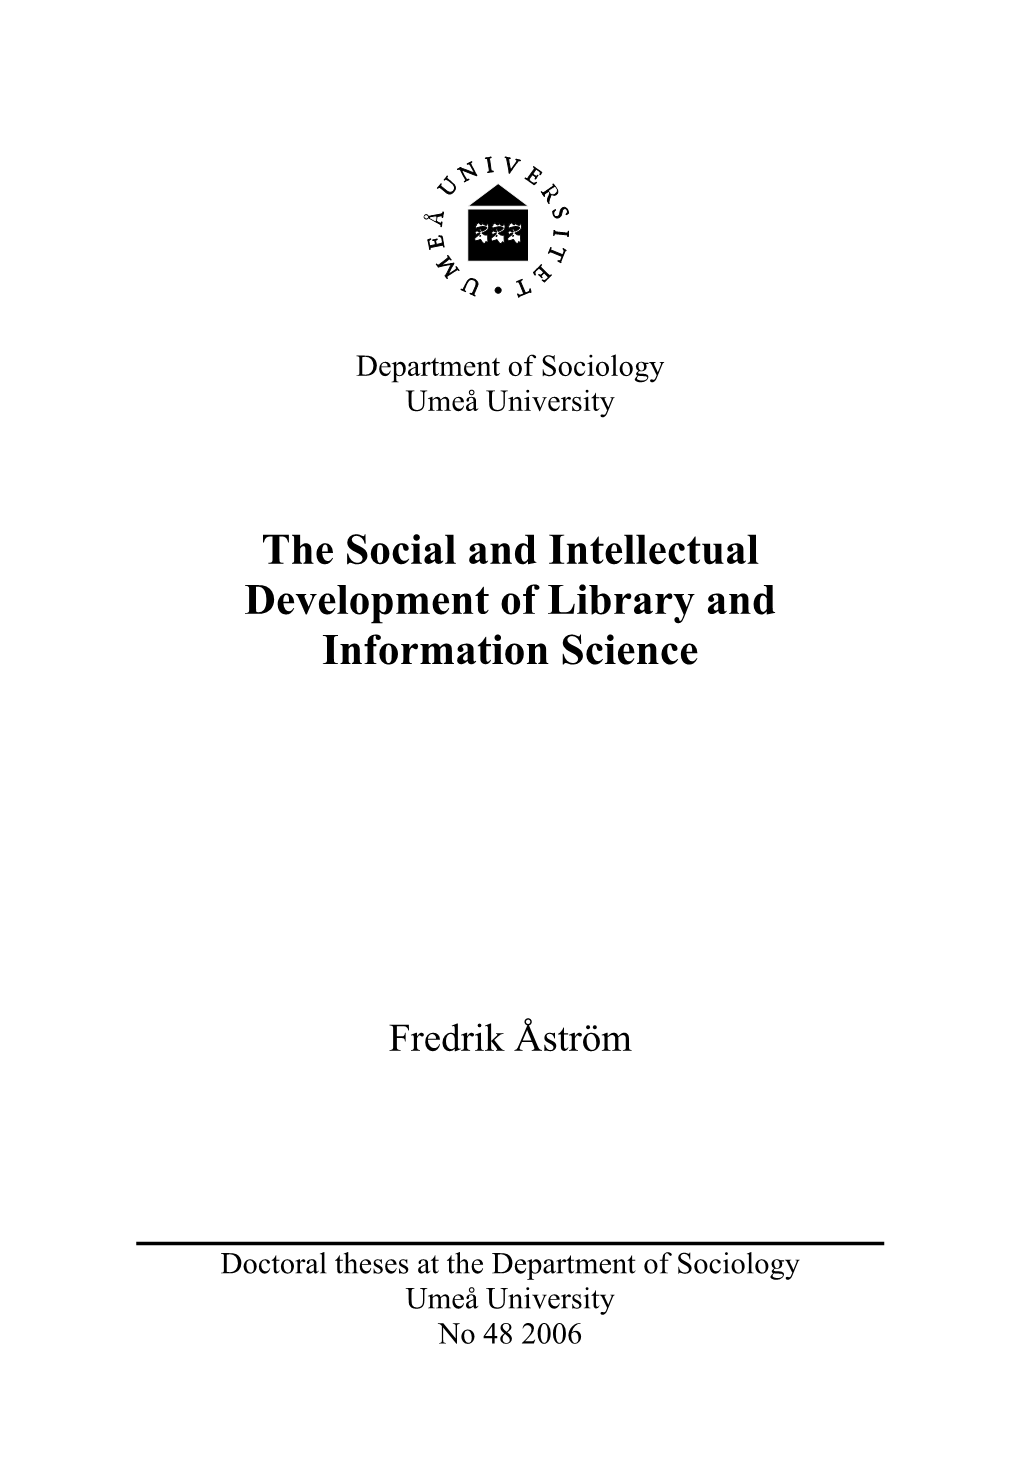 The Social and Intellectual Development of Library and Information Science